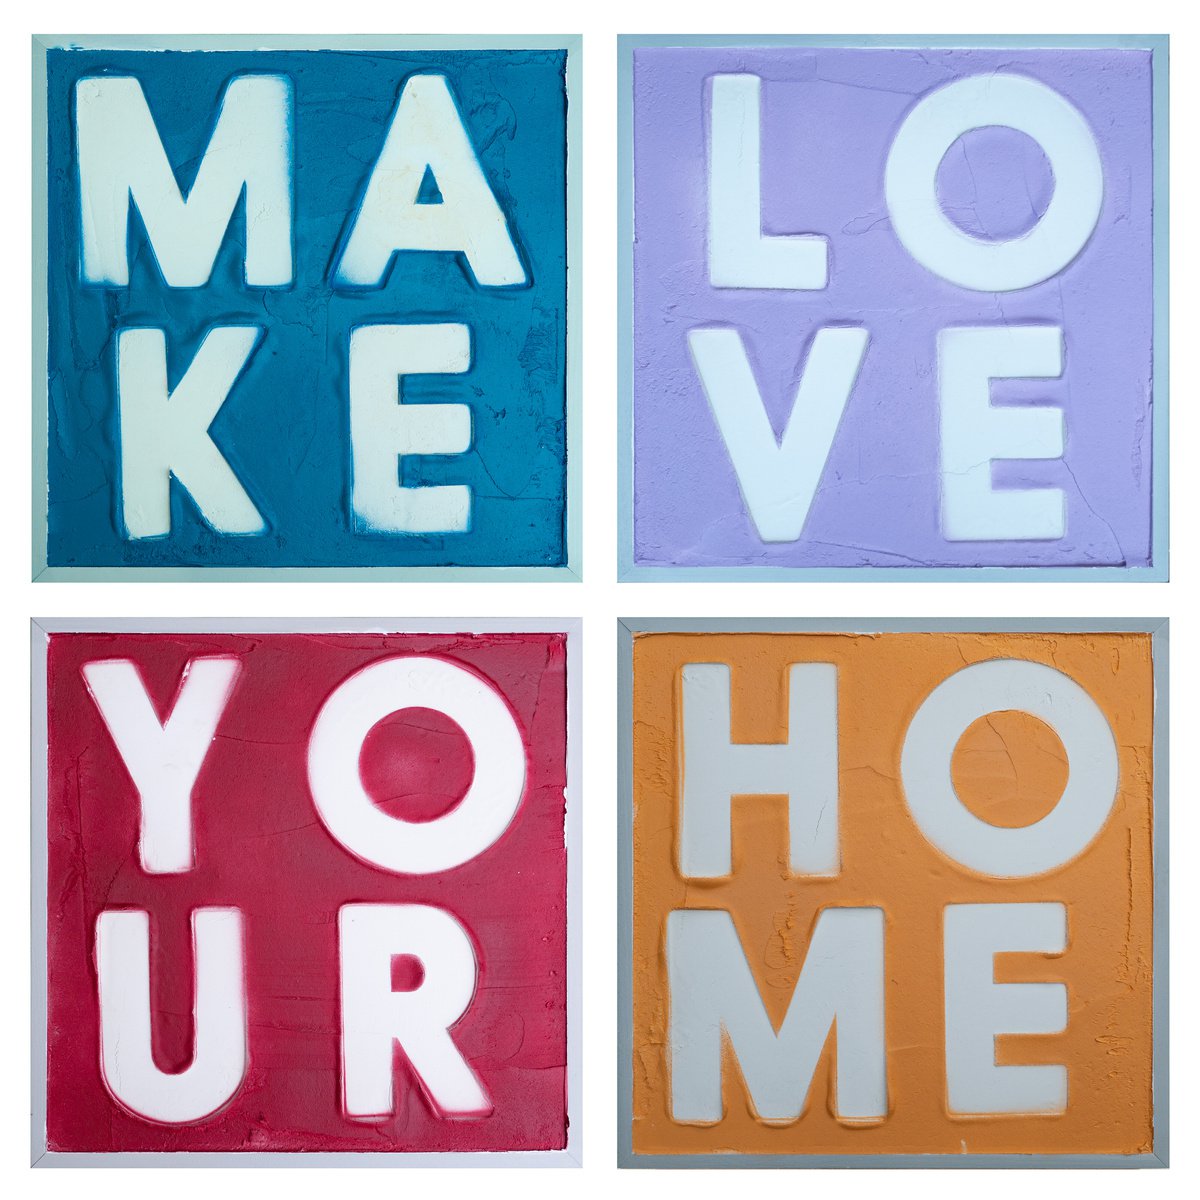 MAKE LOVE YOUR HOME by Dangerous Minds Artists